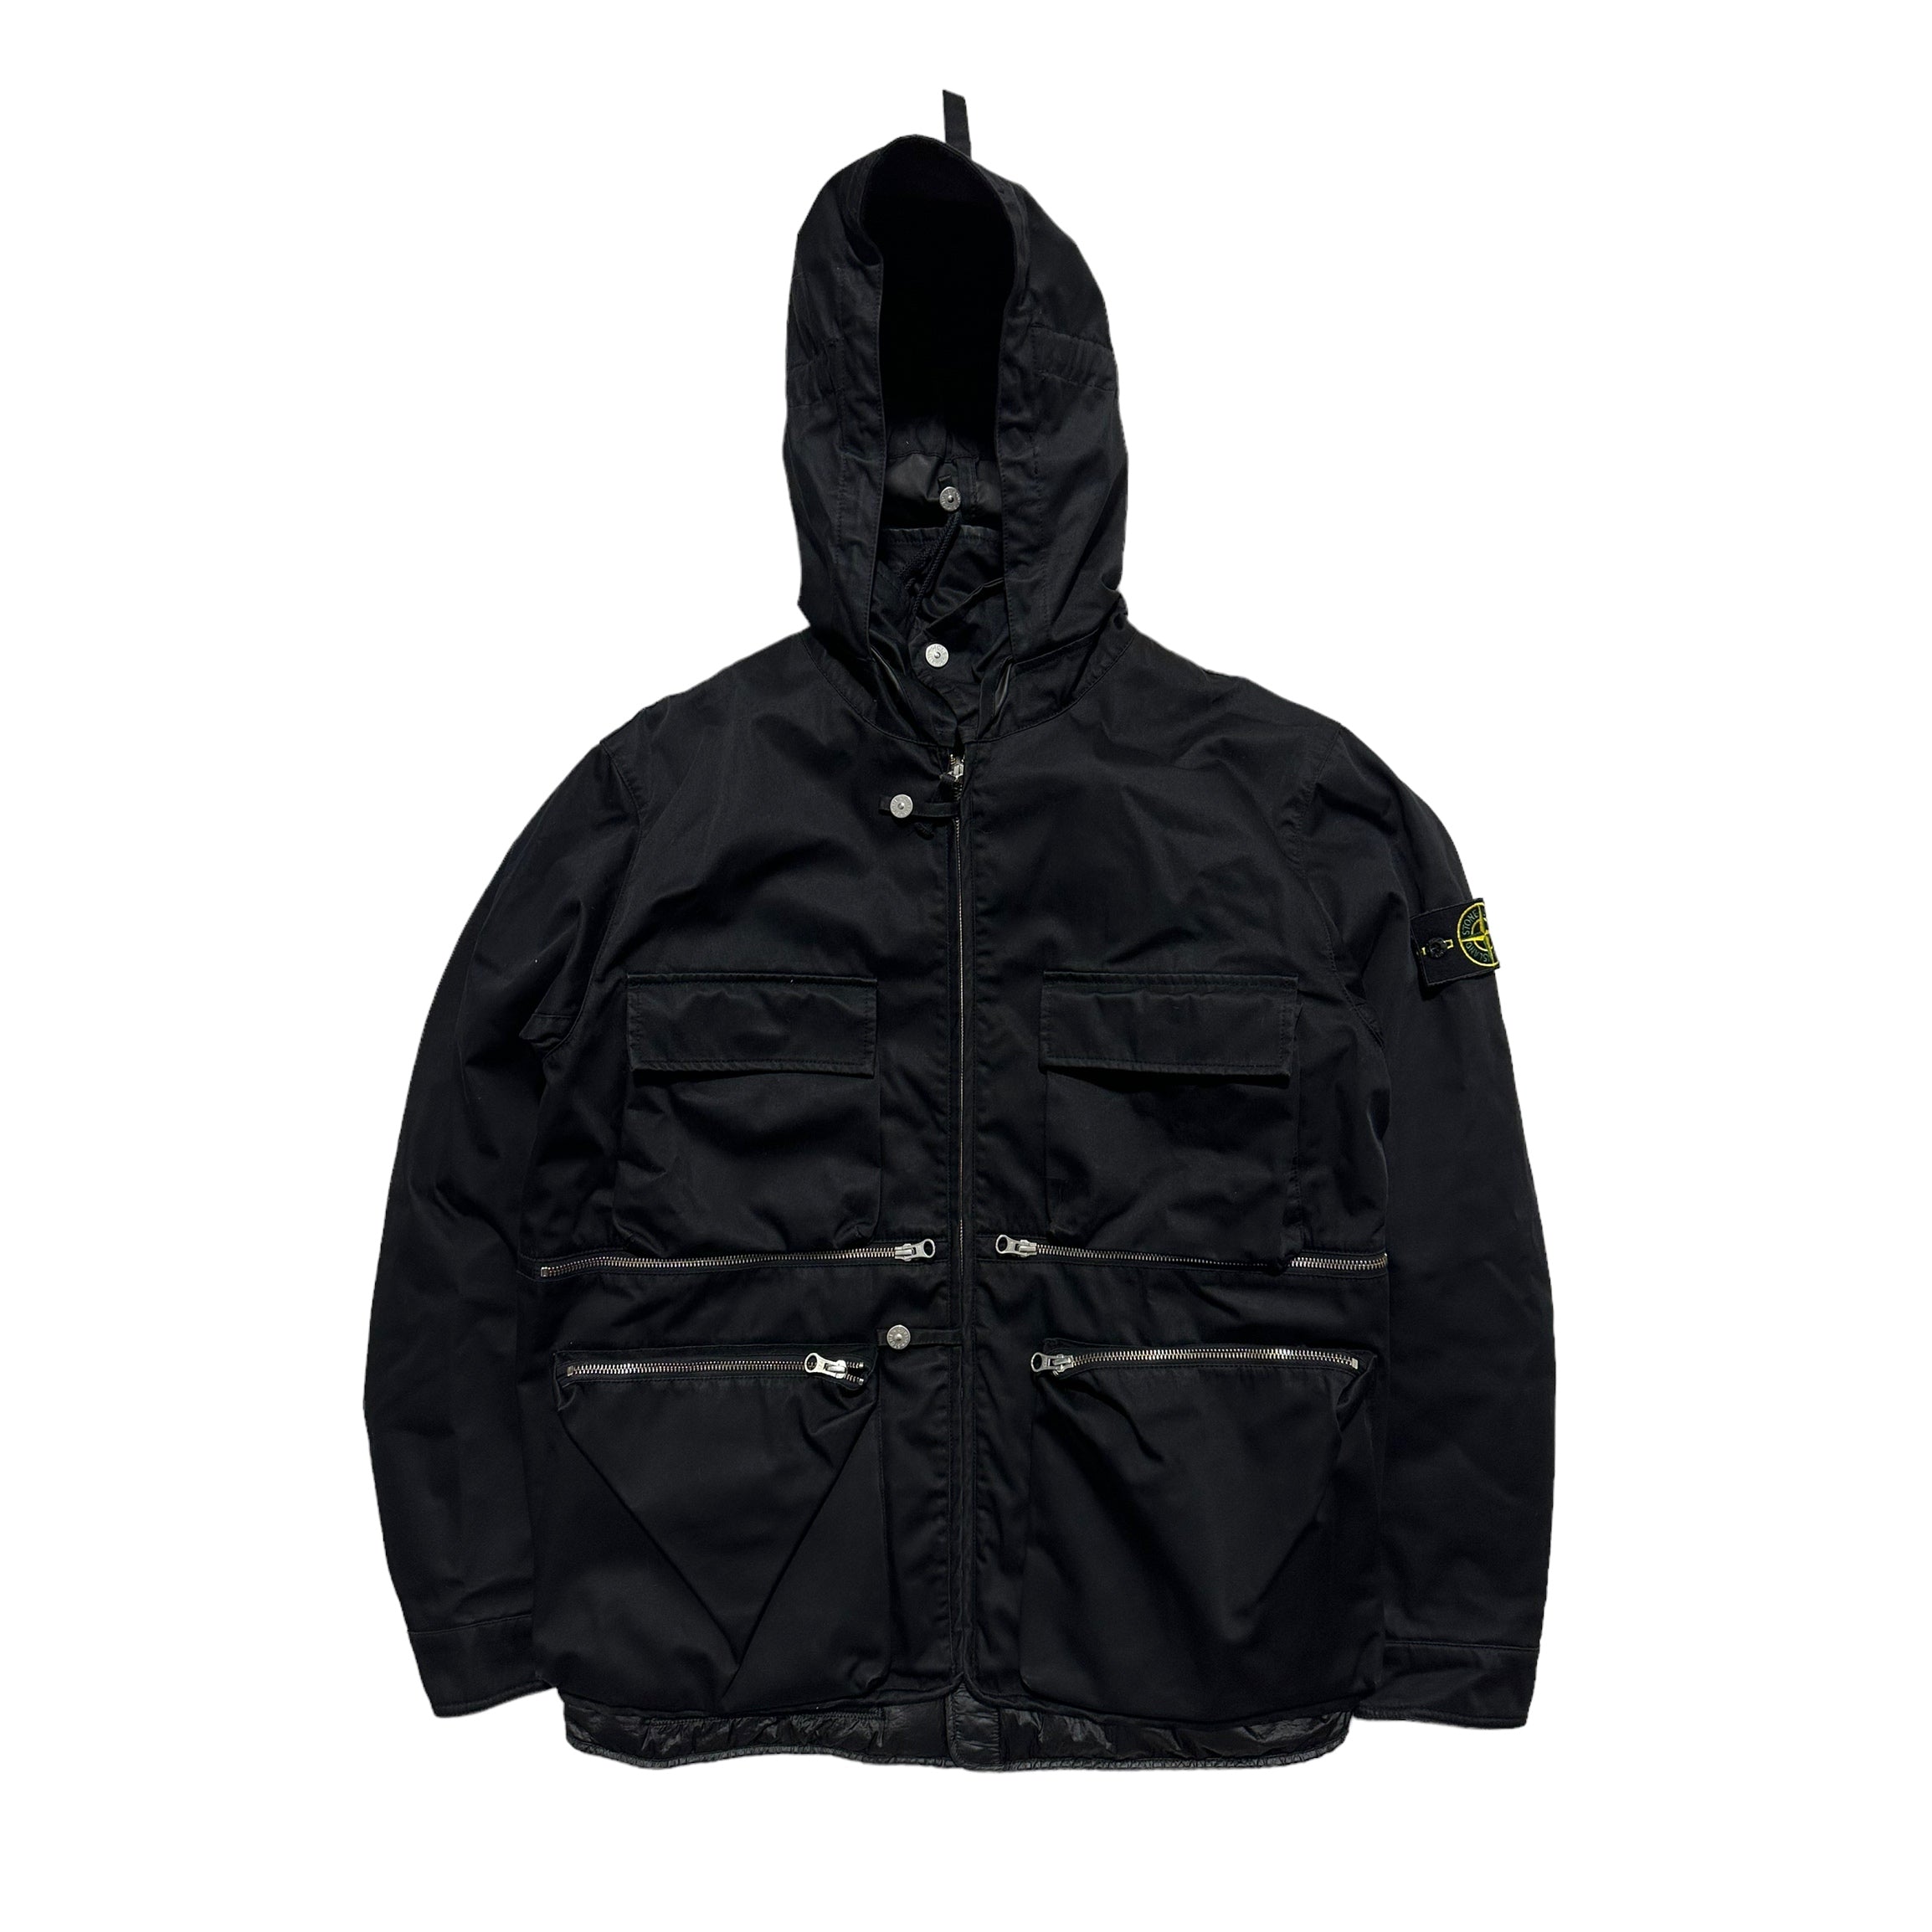 Stone Island X Supreme Helicopter MultiPocket Jacket with Inner